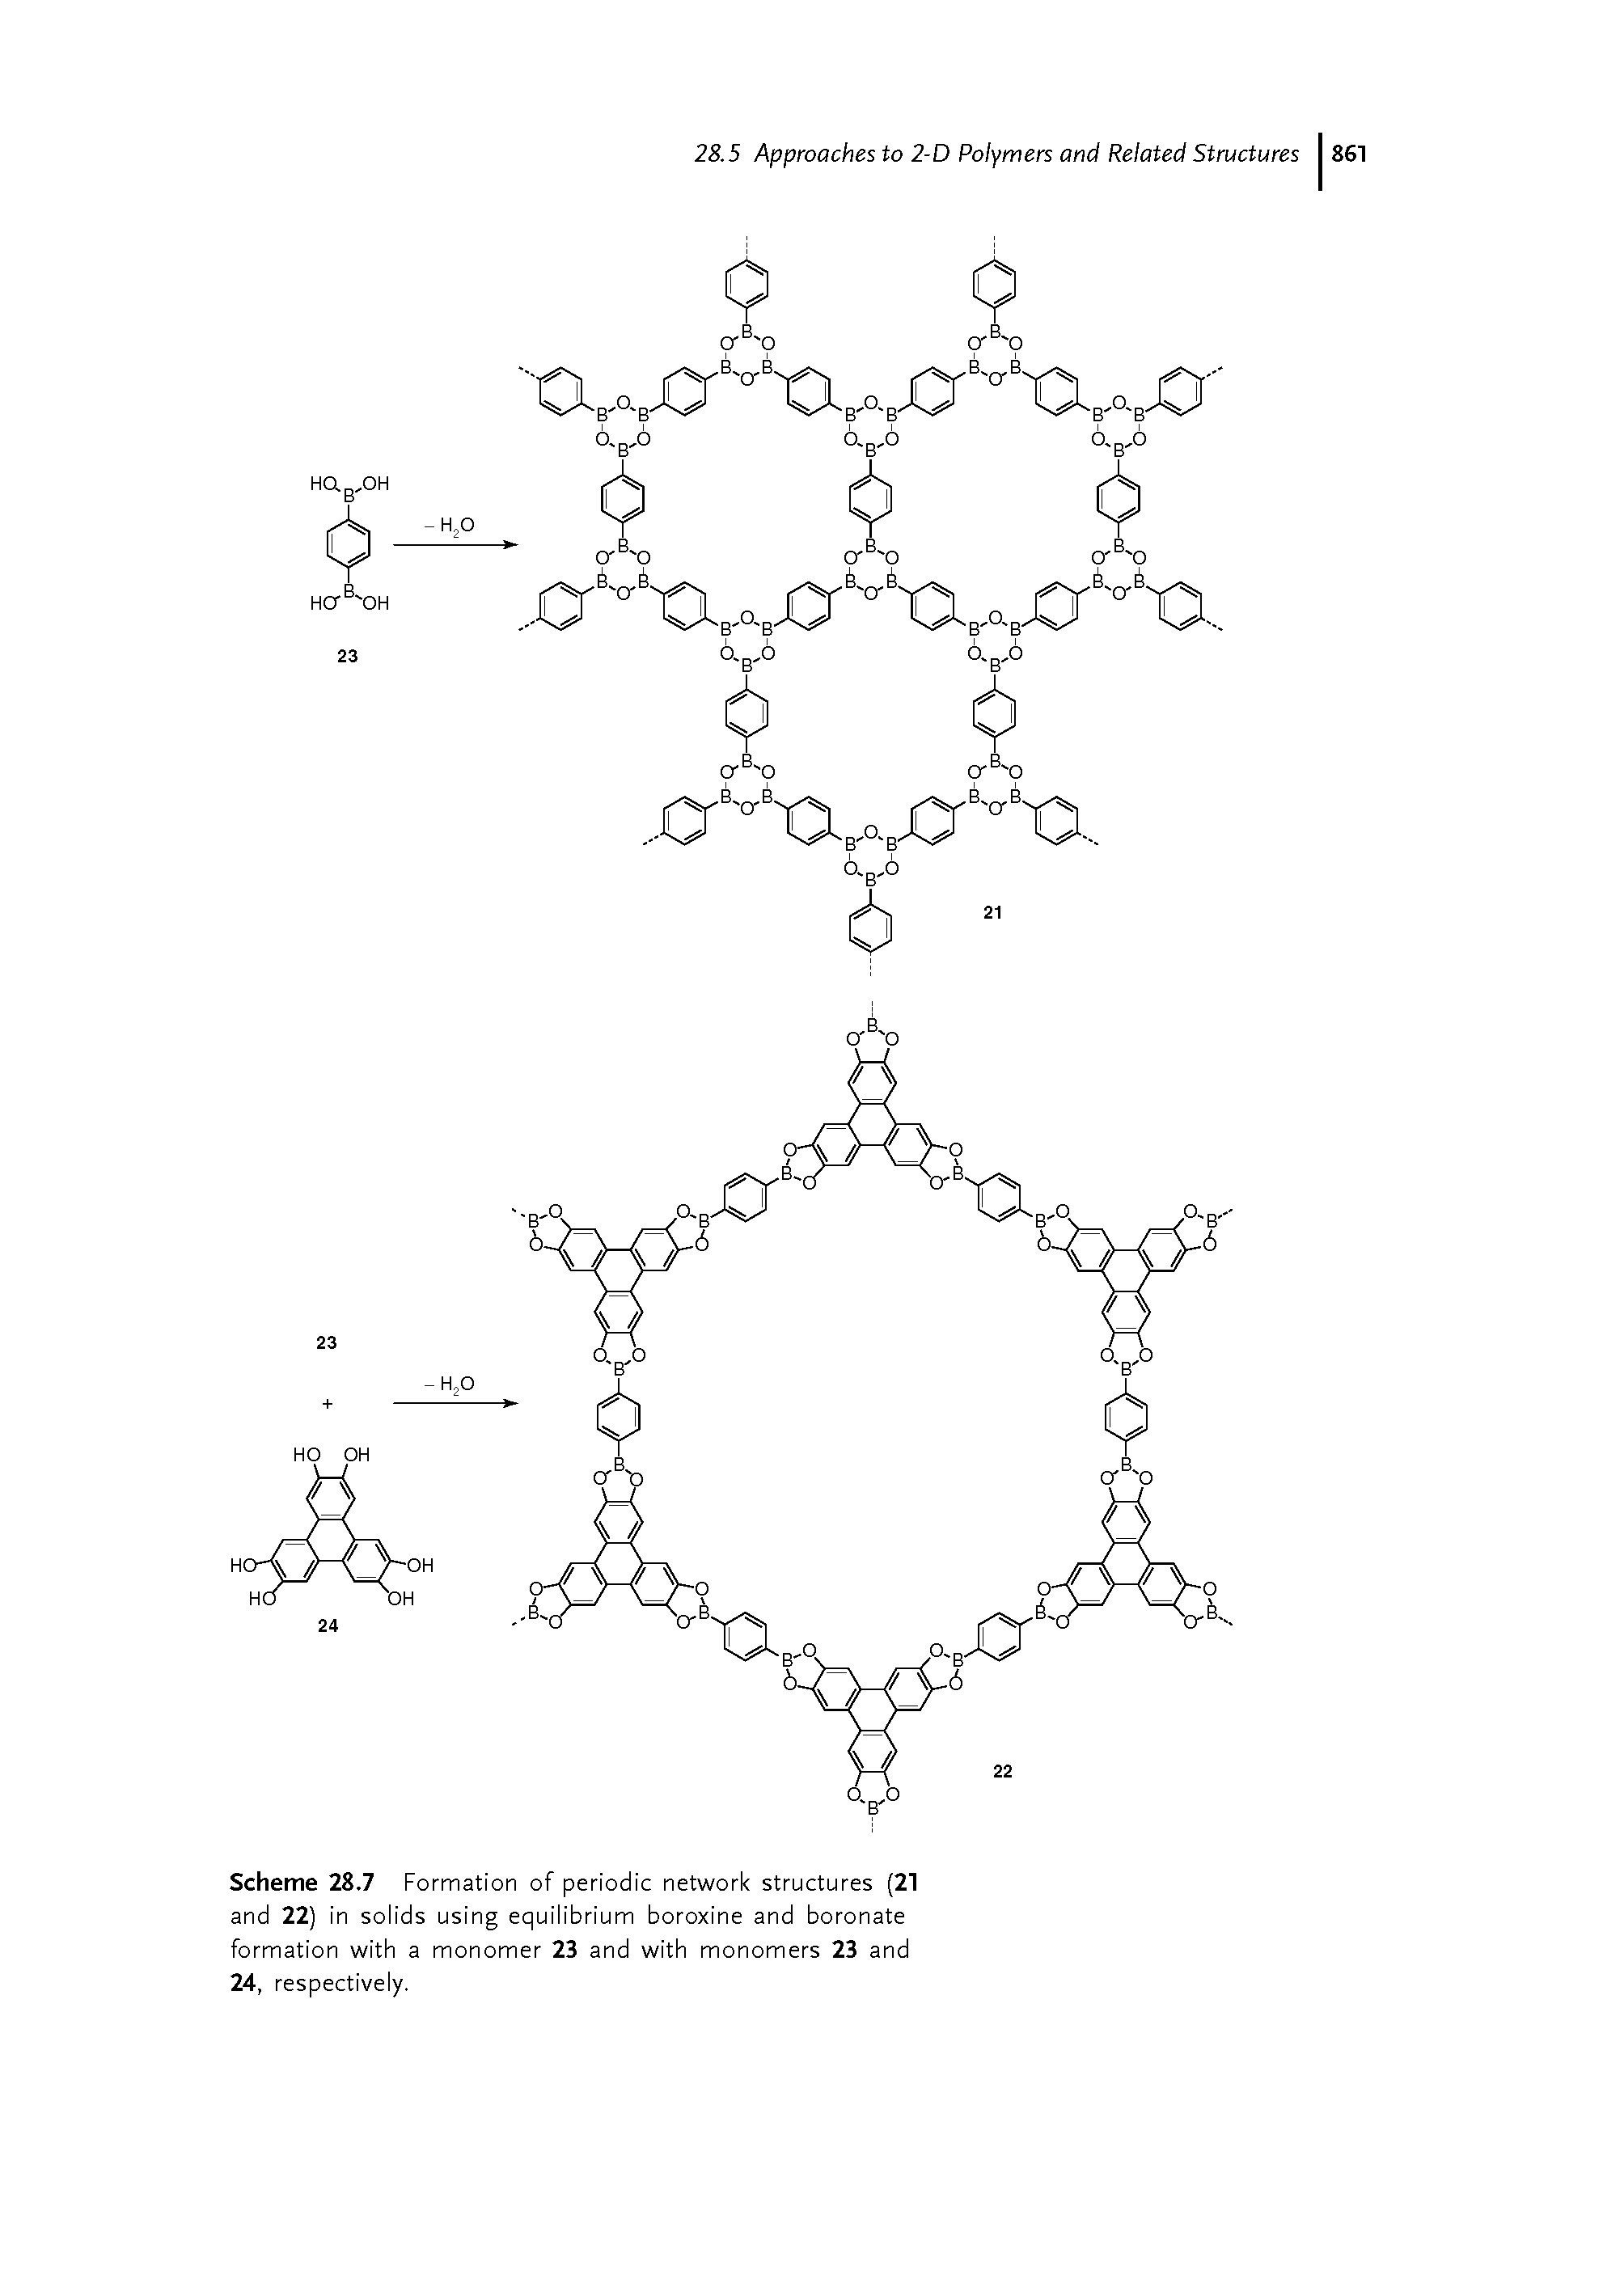 Scheme 28.7 Formation of periodic network structures (21 and 22) in solids using equilibrium boroxine and boronate formation with a monomer 23 and with monomers 23 and 24, respectively.